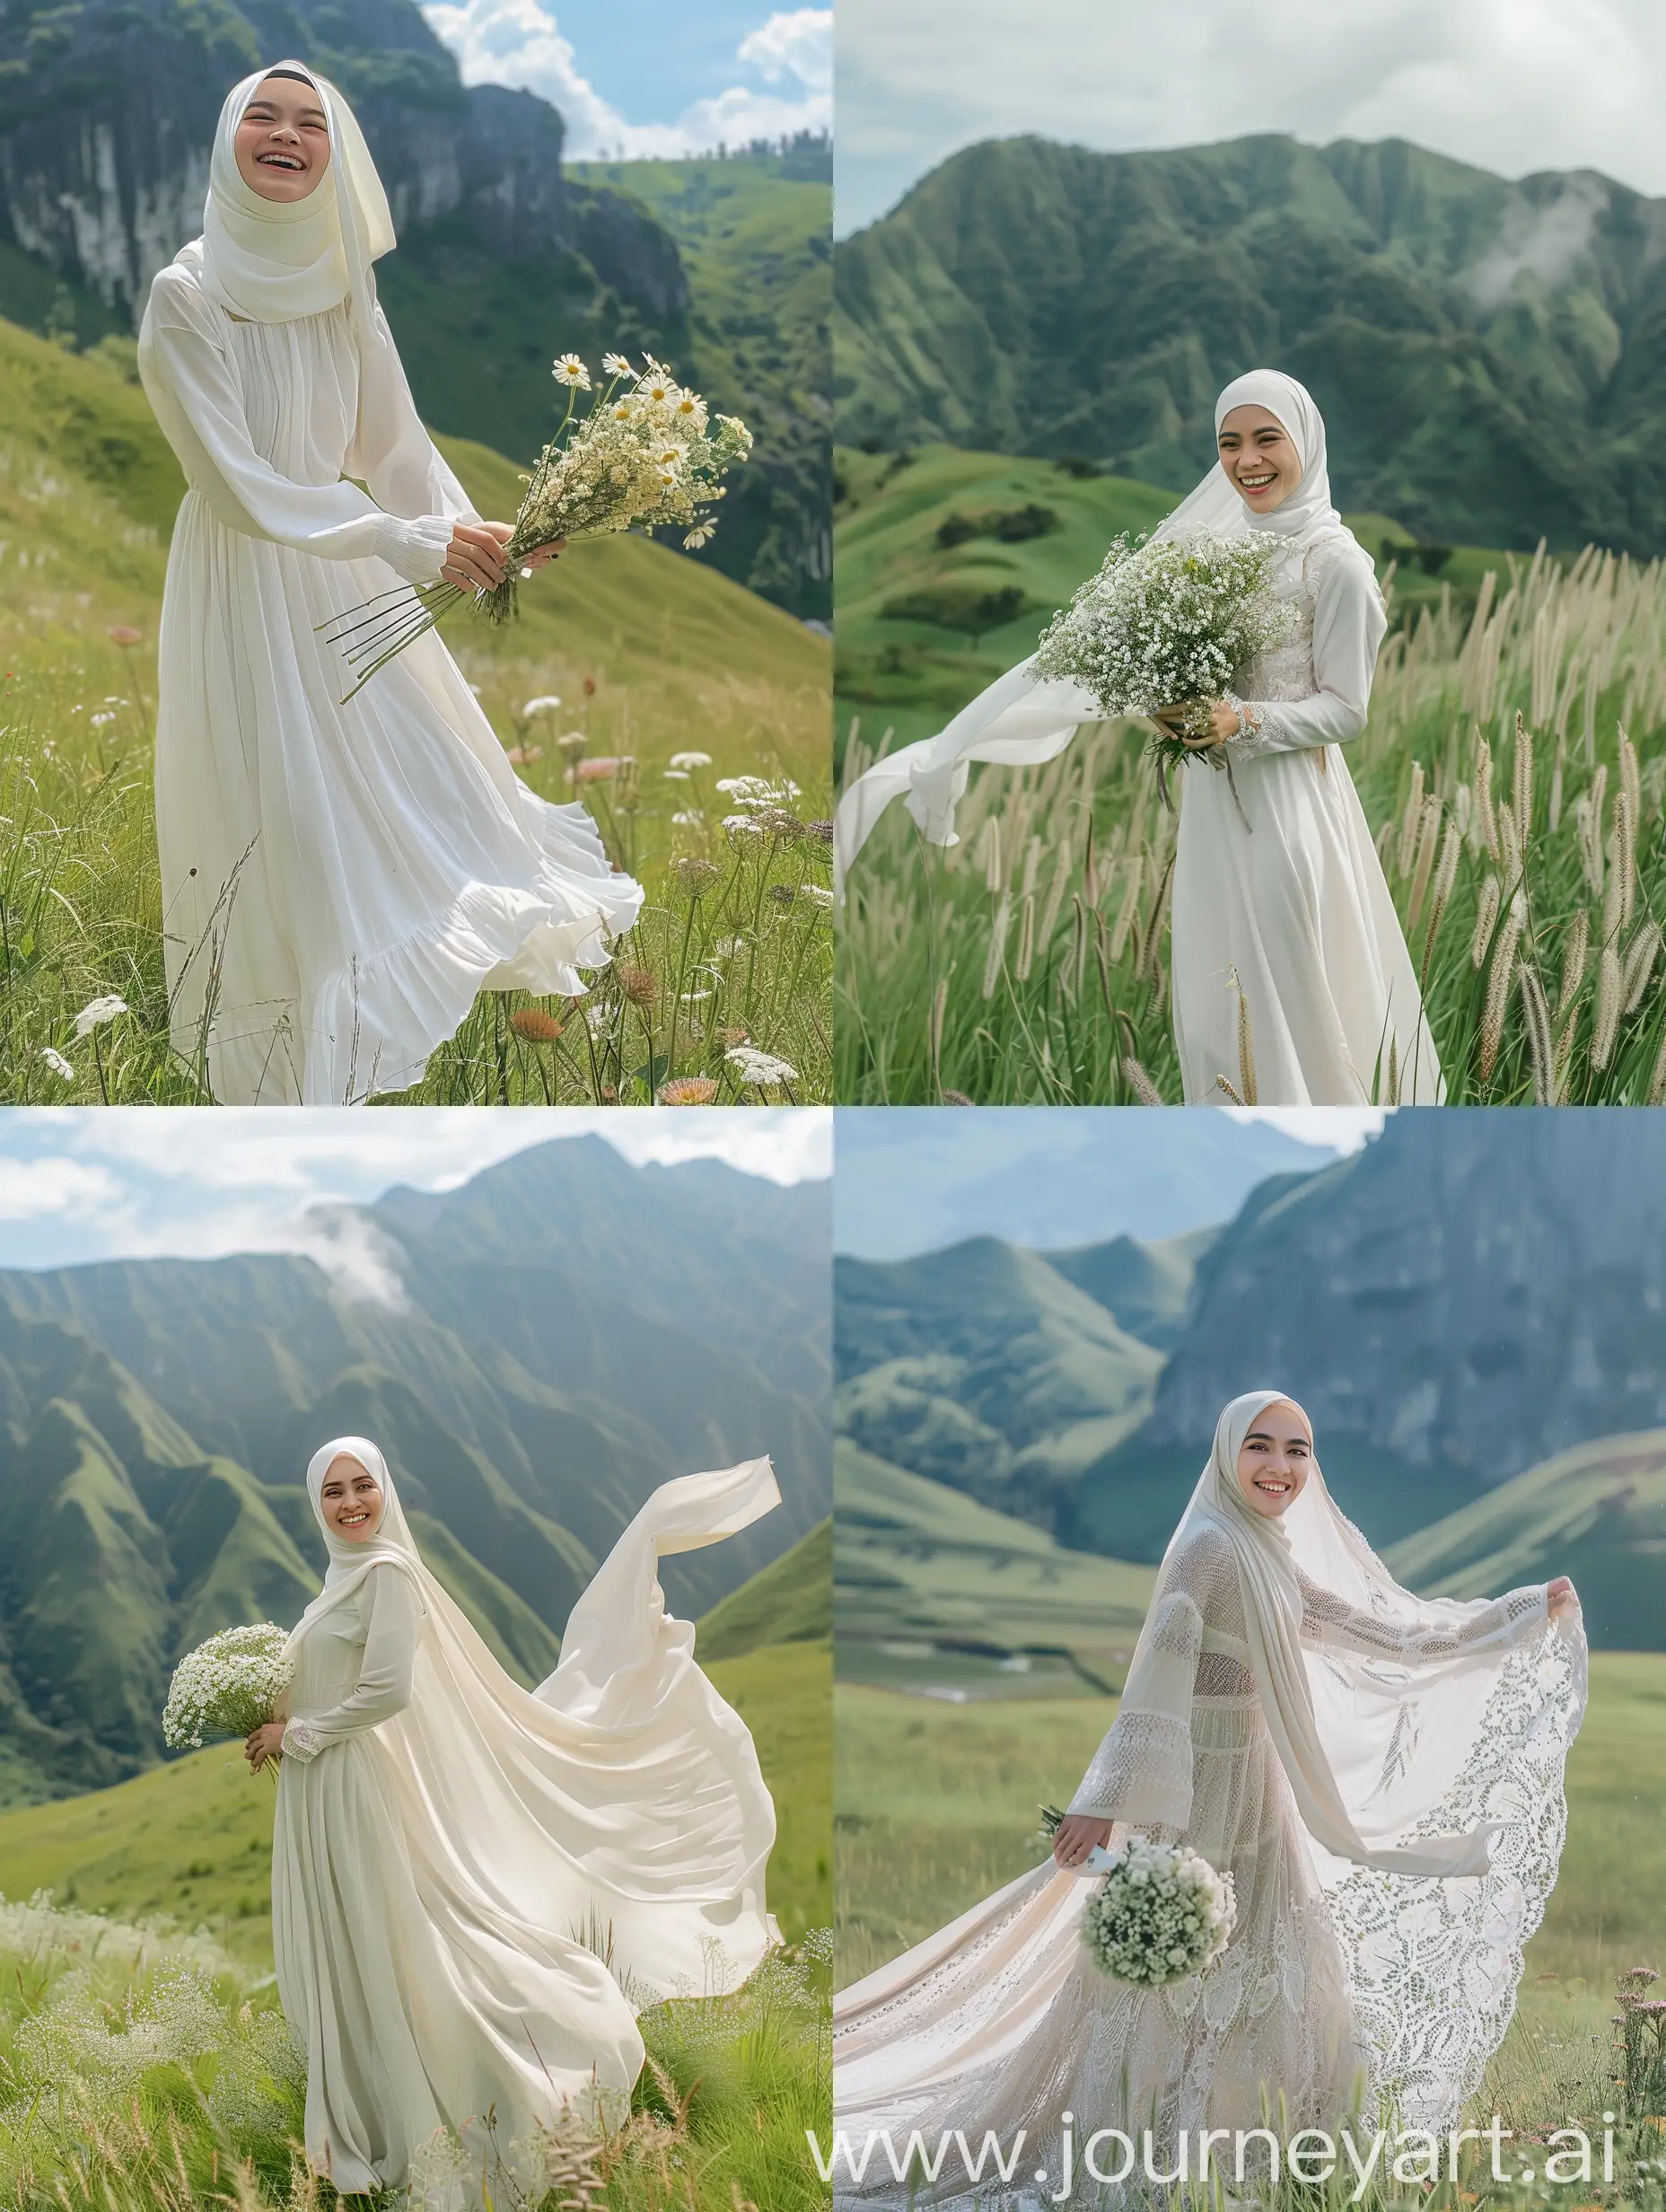 Charming-Indonesian-Woman-in-Hijab-Laughing-with-Bouquet-in-Mountain-Landscape